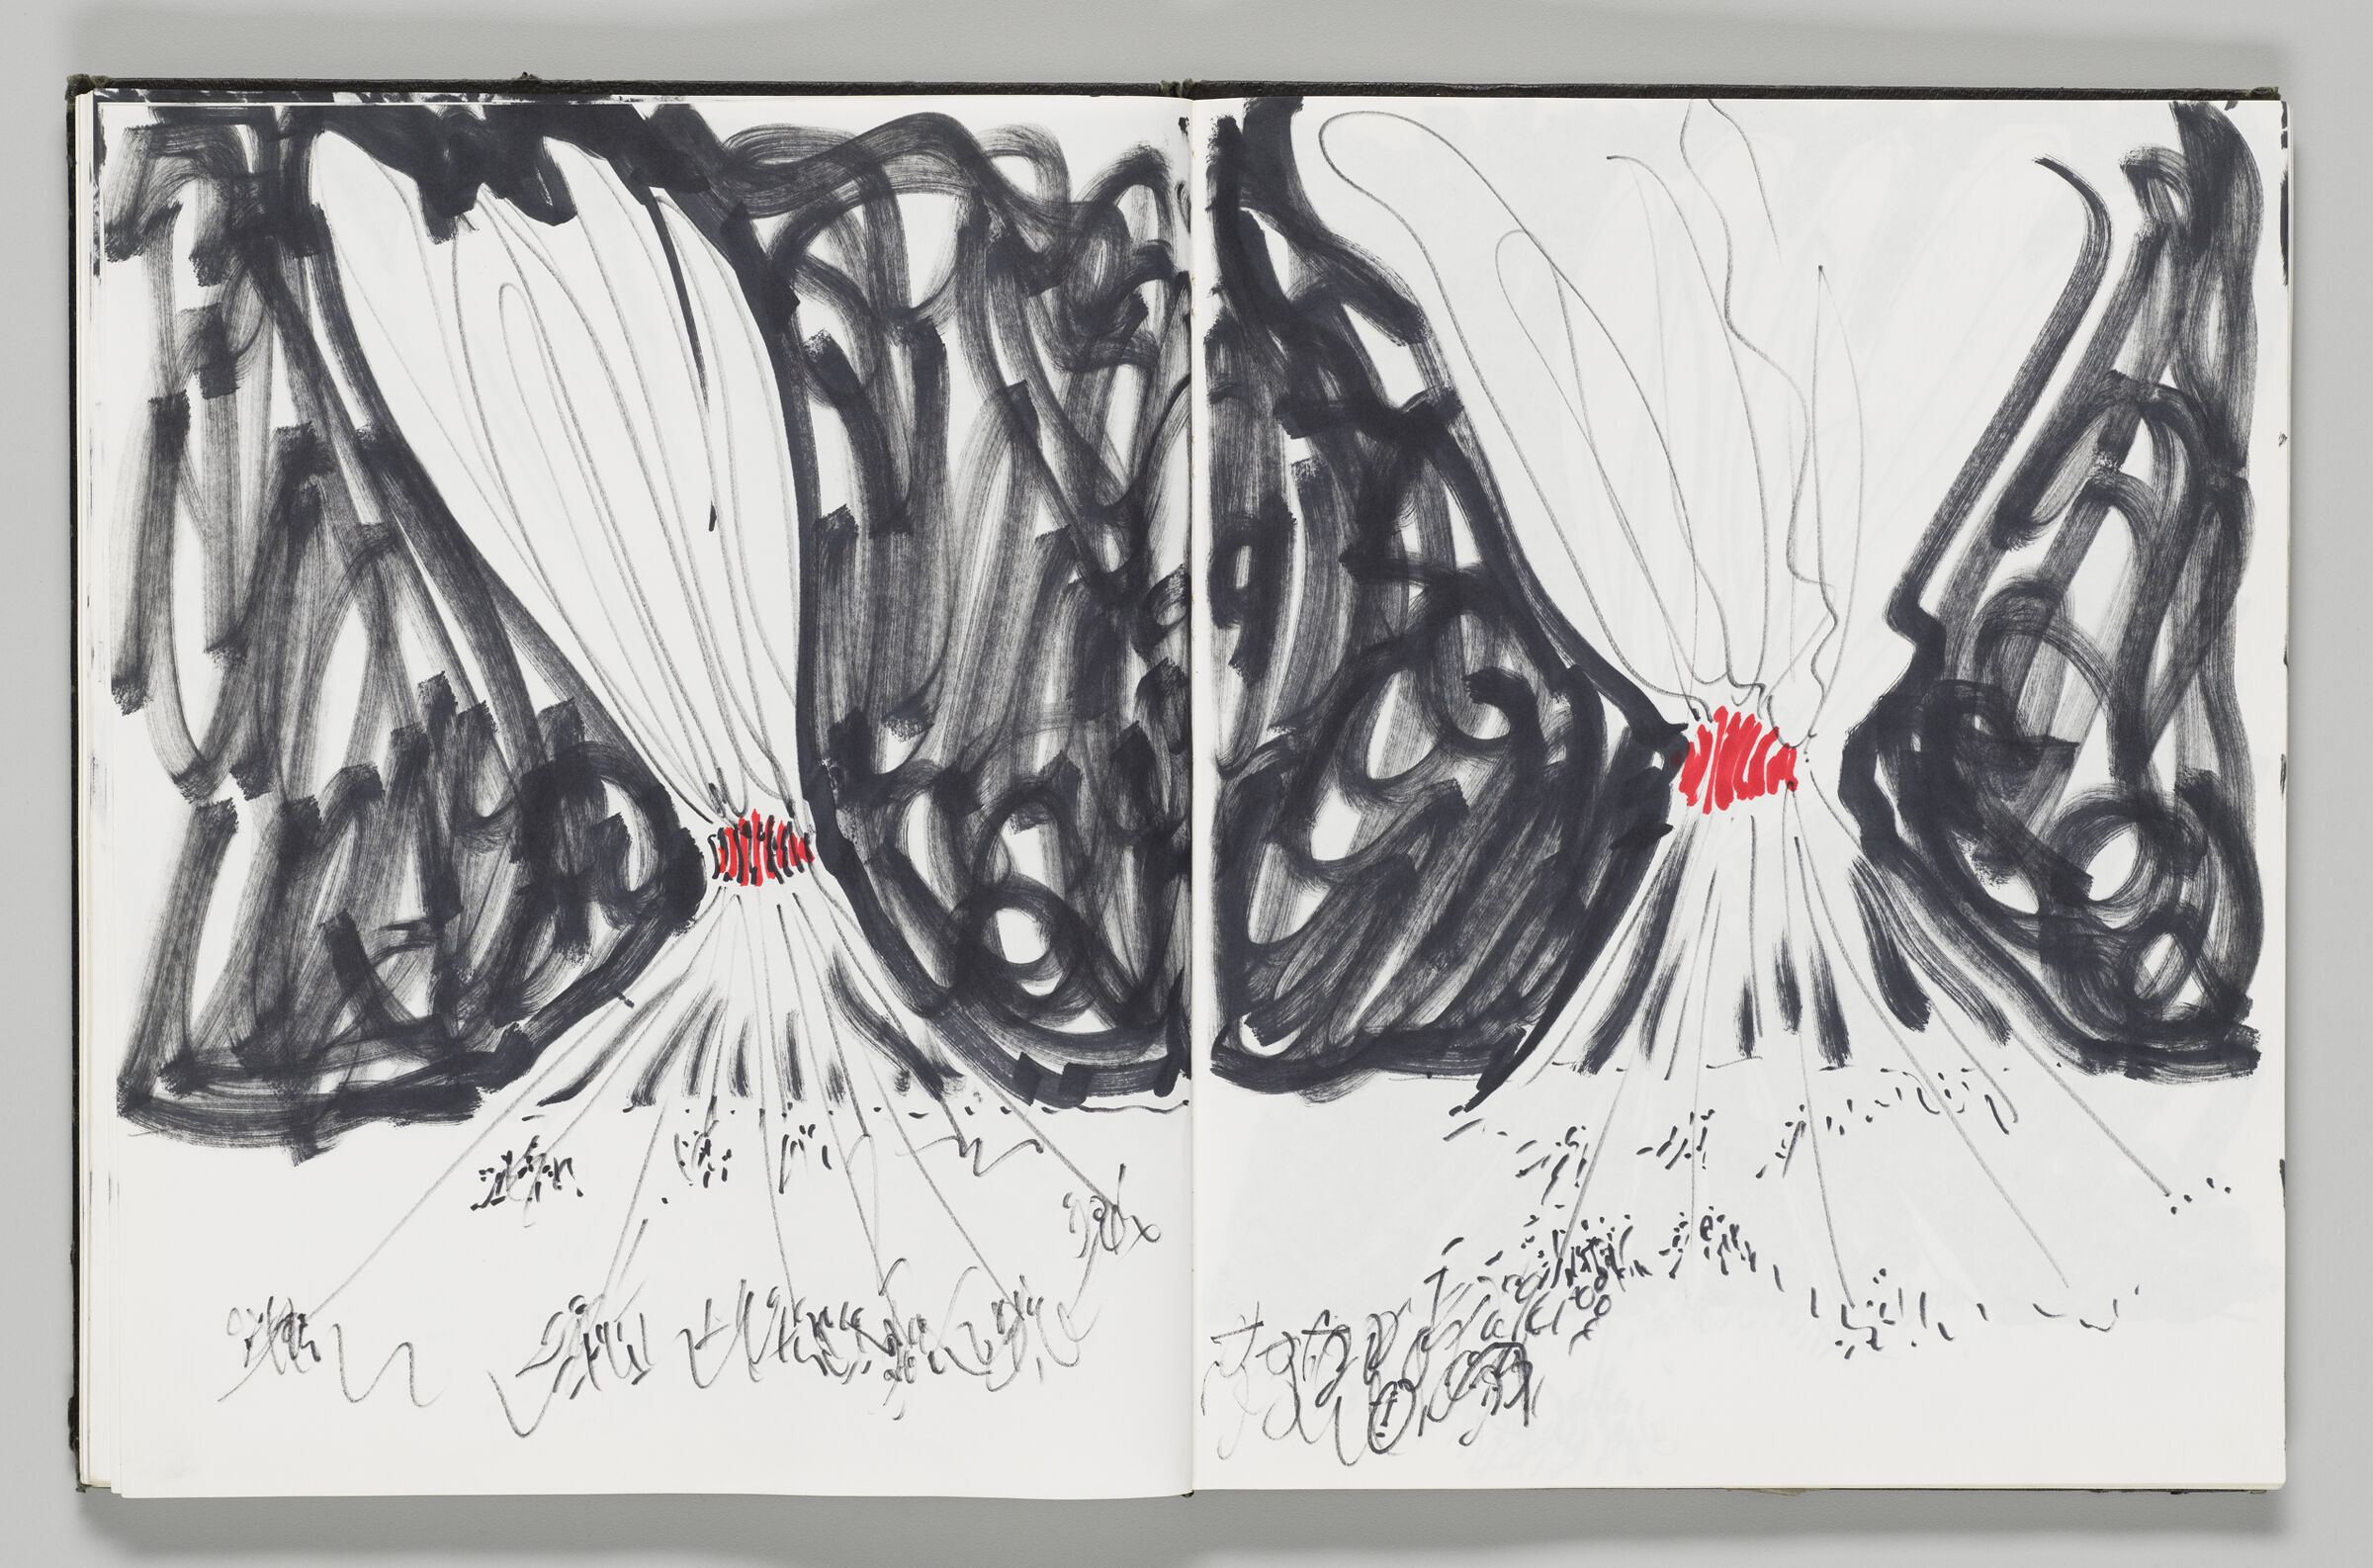 Untitled (Inflatable With Crowd Against Black Background, Left Page); Untitled (Inflatable With Crowd Against Black Background, Right Page)